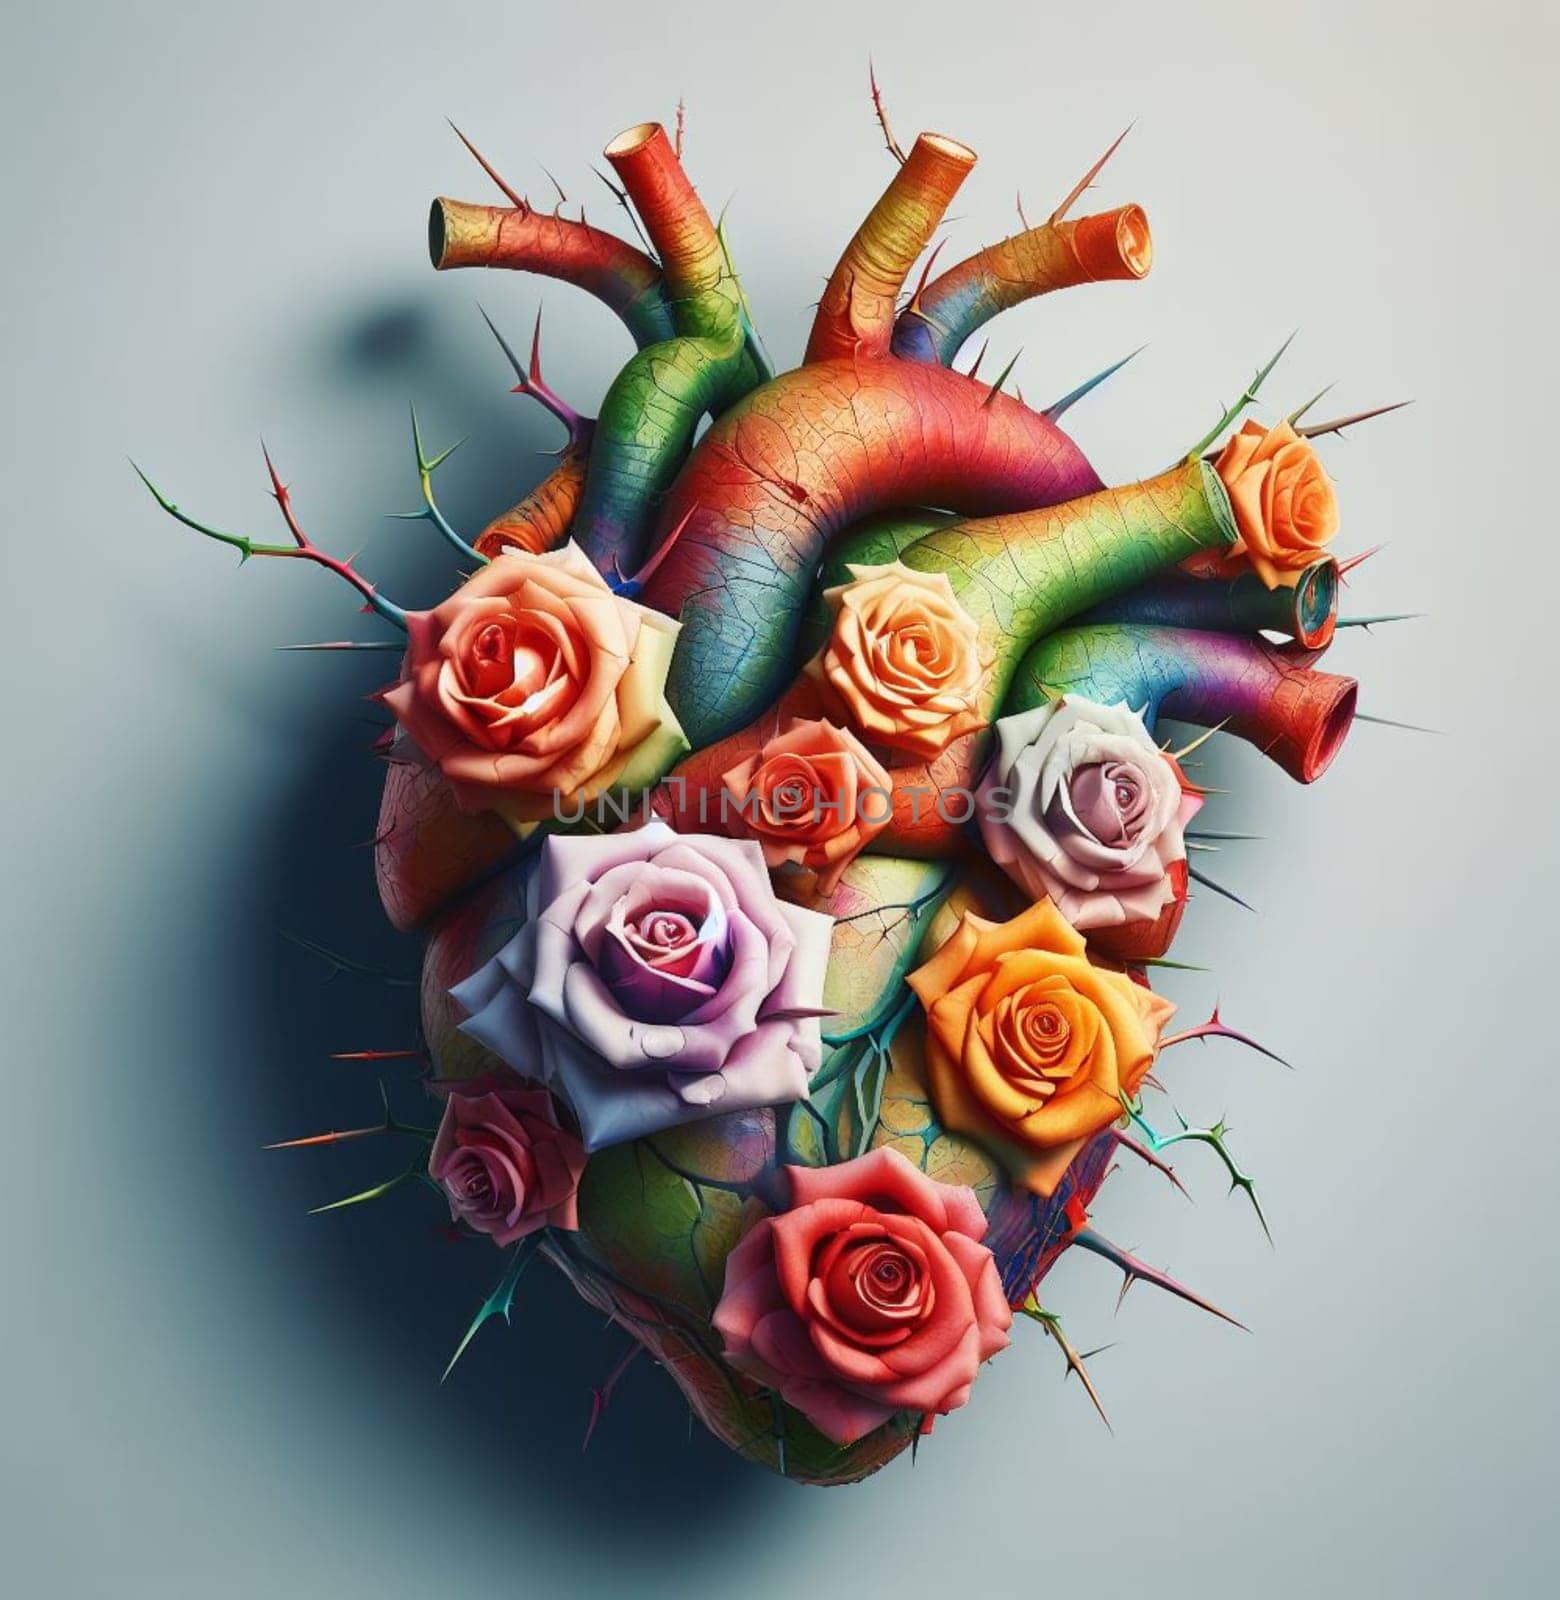 heart themed illustration shaped with flowers branches thorns by verbano